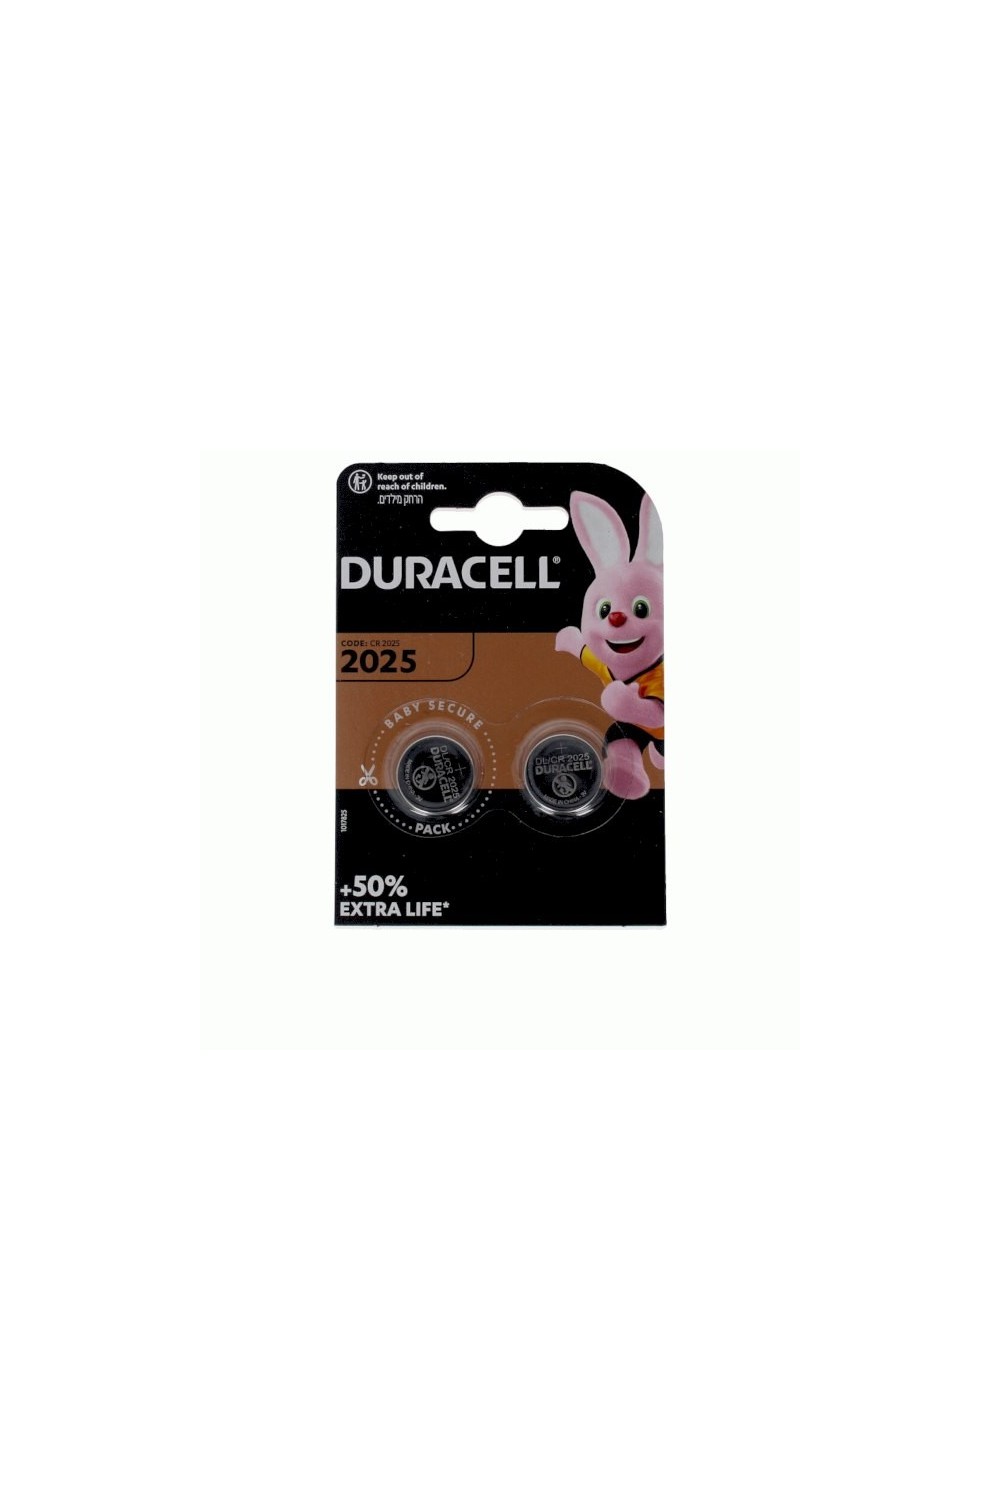 Duracell Lithium Button Battery 3V 2025 DL/CR2025 2 Units